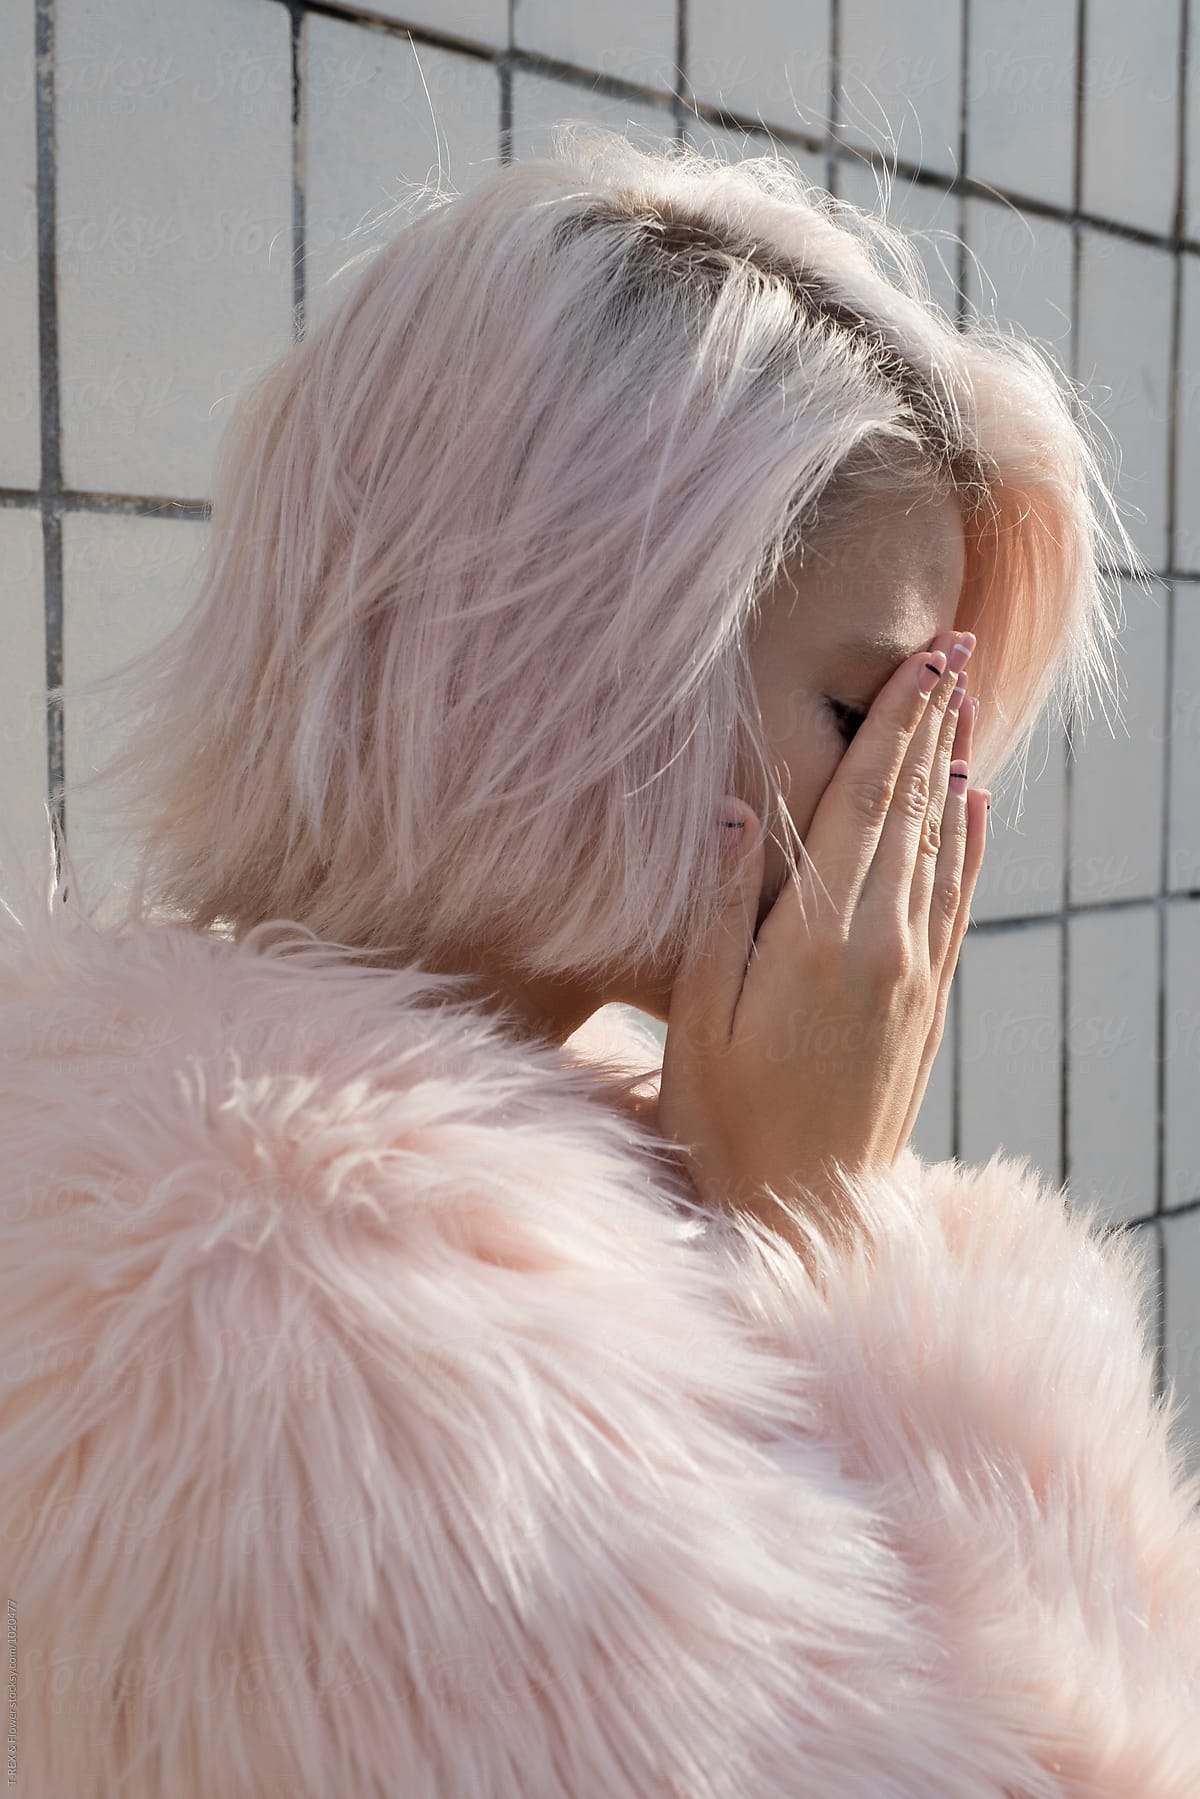 Close Up Of Sad Blonde Girl Covering Face With Hands By Stocksy Contributor Danil Nevsky 